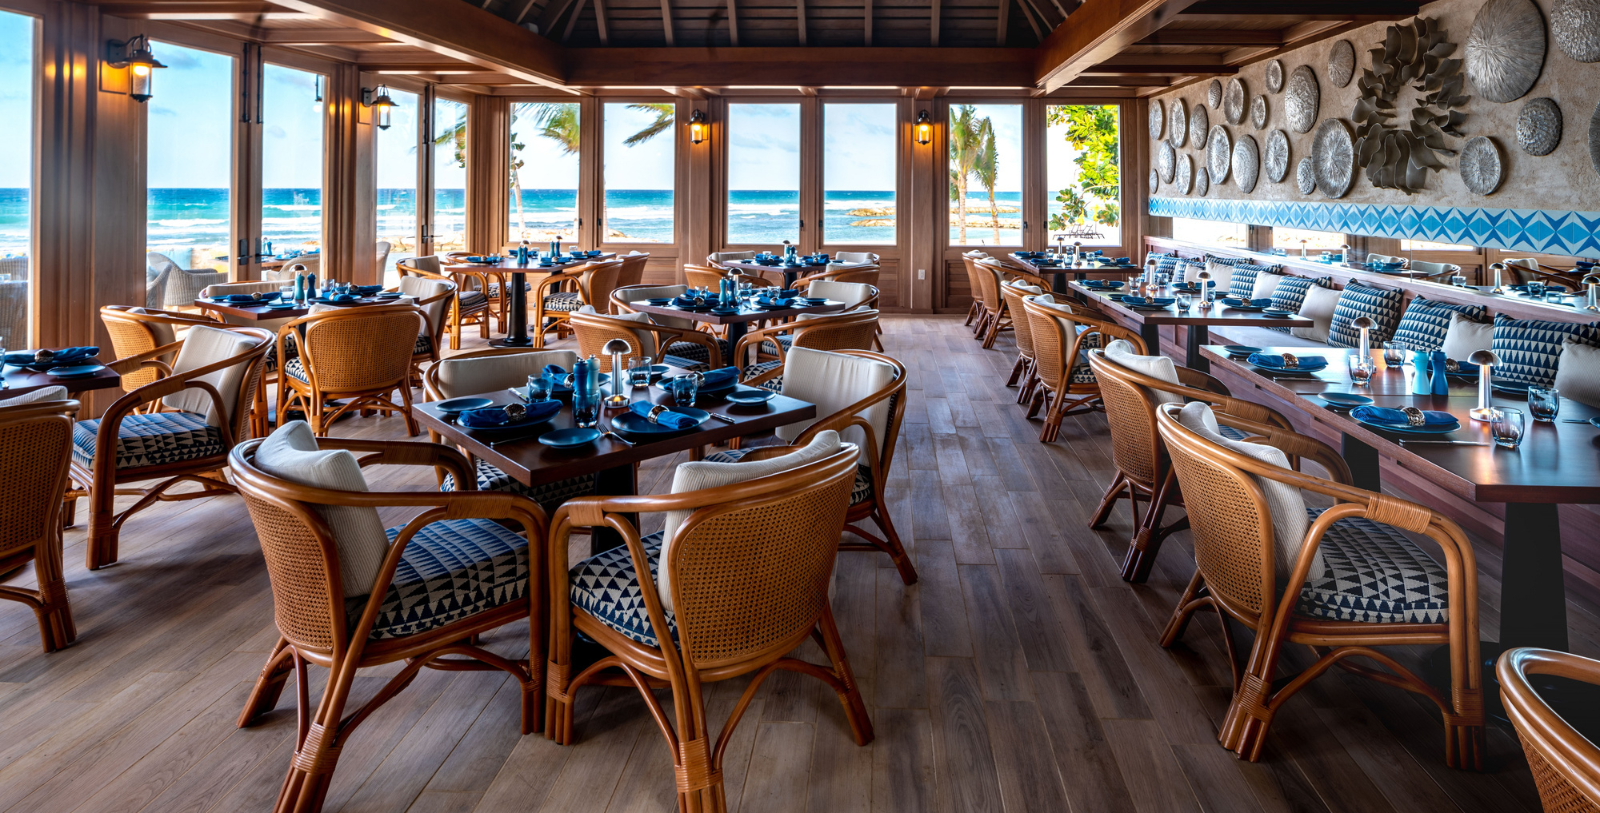 Taste the bounty of Jamaica at one of the resort’s dining venues, which are committed to supporting the agricultural efforts of local farmers.